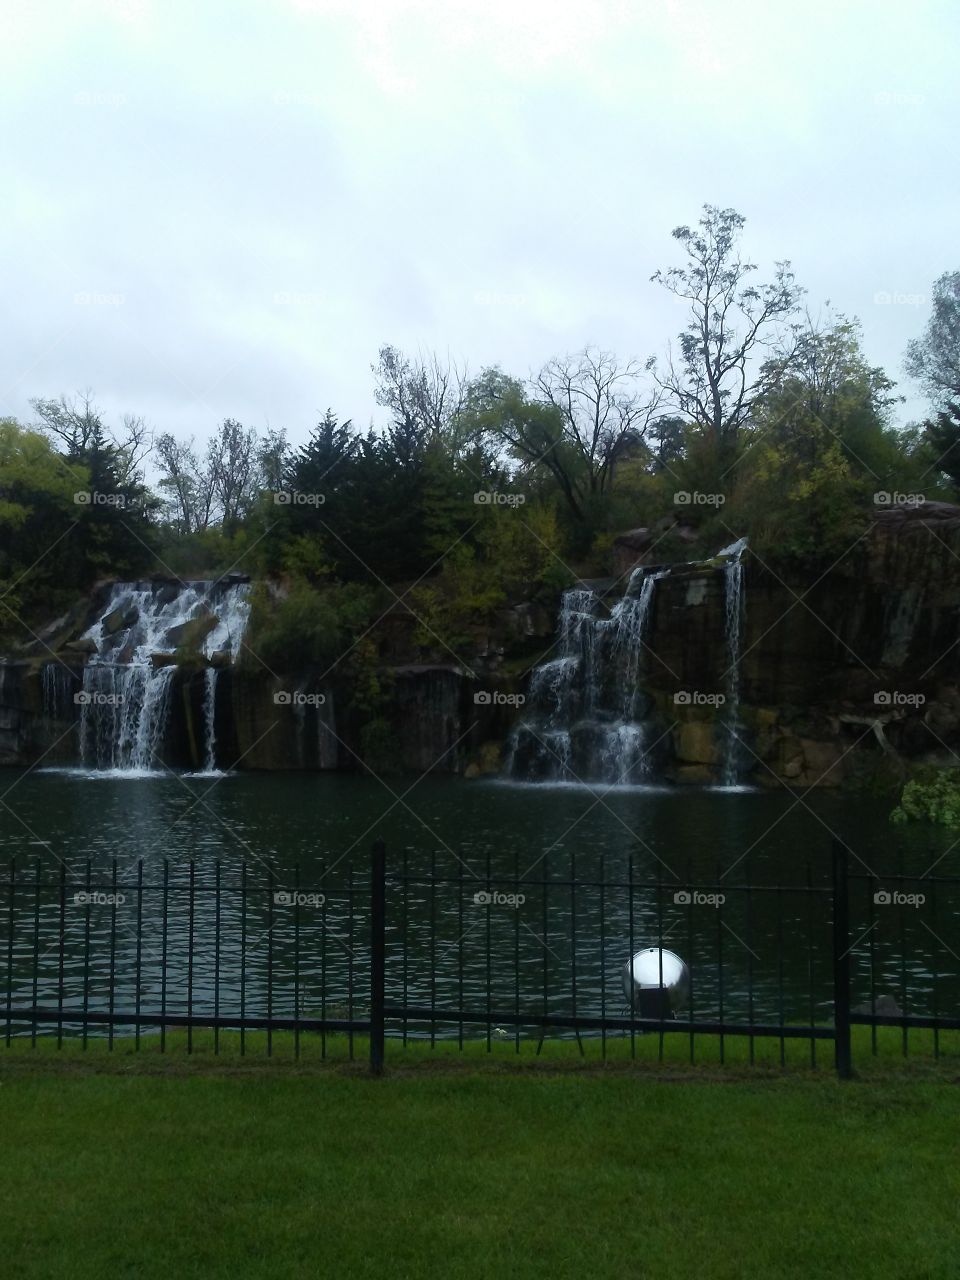 Waterfalls located on the site of an old quarry at Daggett Memorial Park in Montello,Wisconsin.